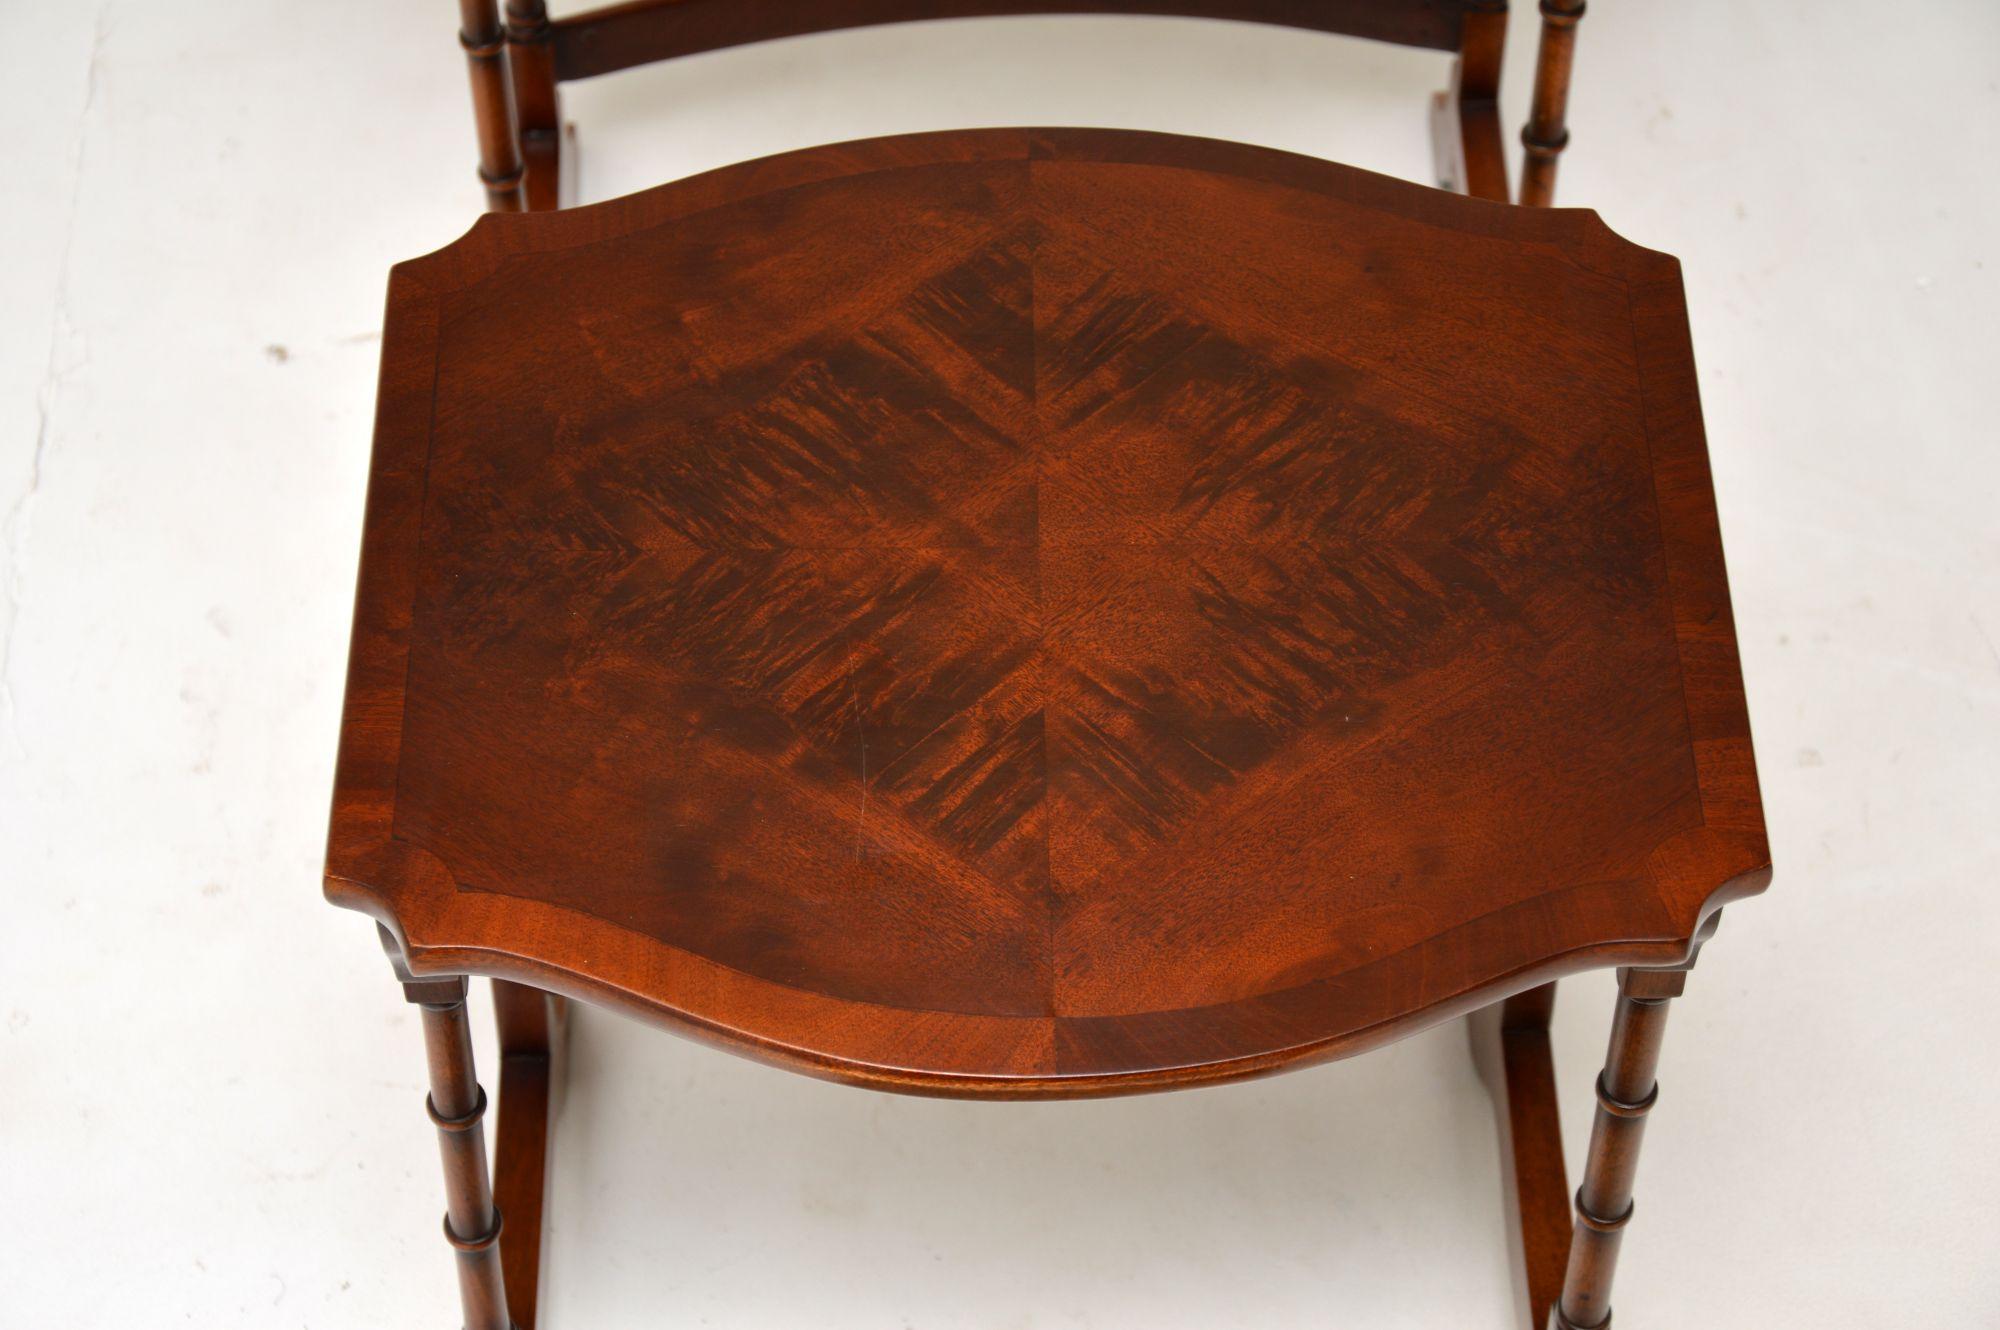 Early 20th Century Antique Figured Walnut Nest of Three Tables